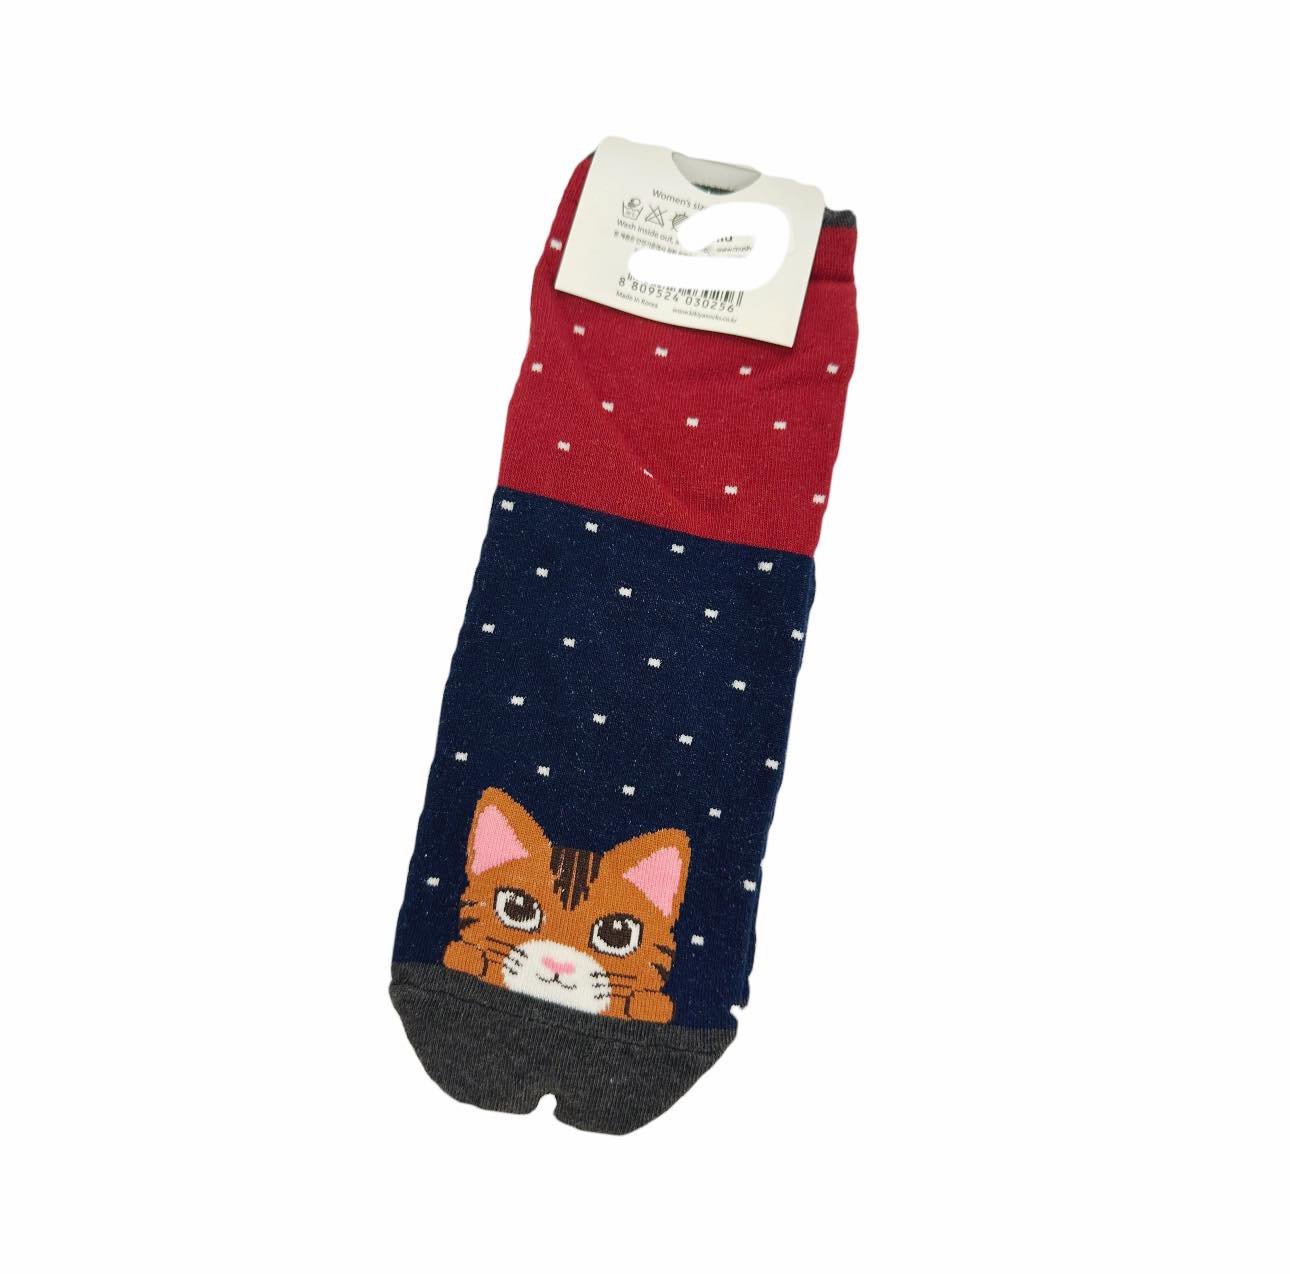 Cute Cat Adult Socks - Red and Navy - Mu Shop